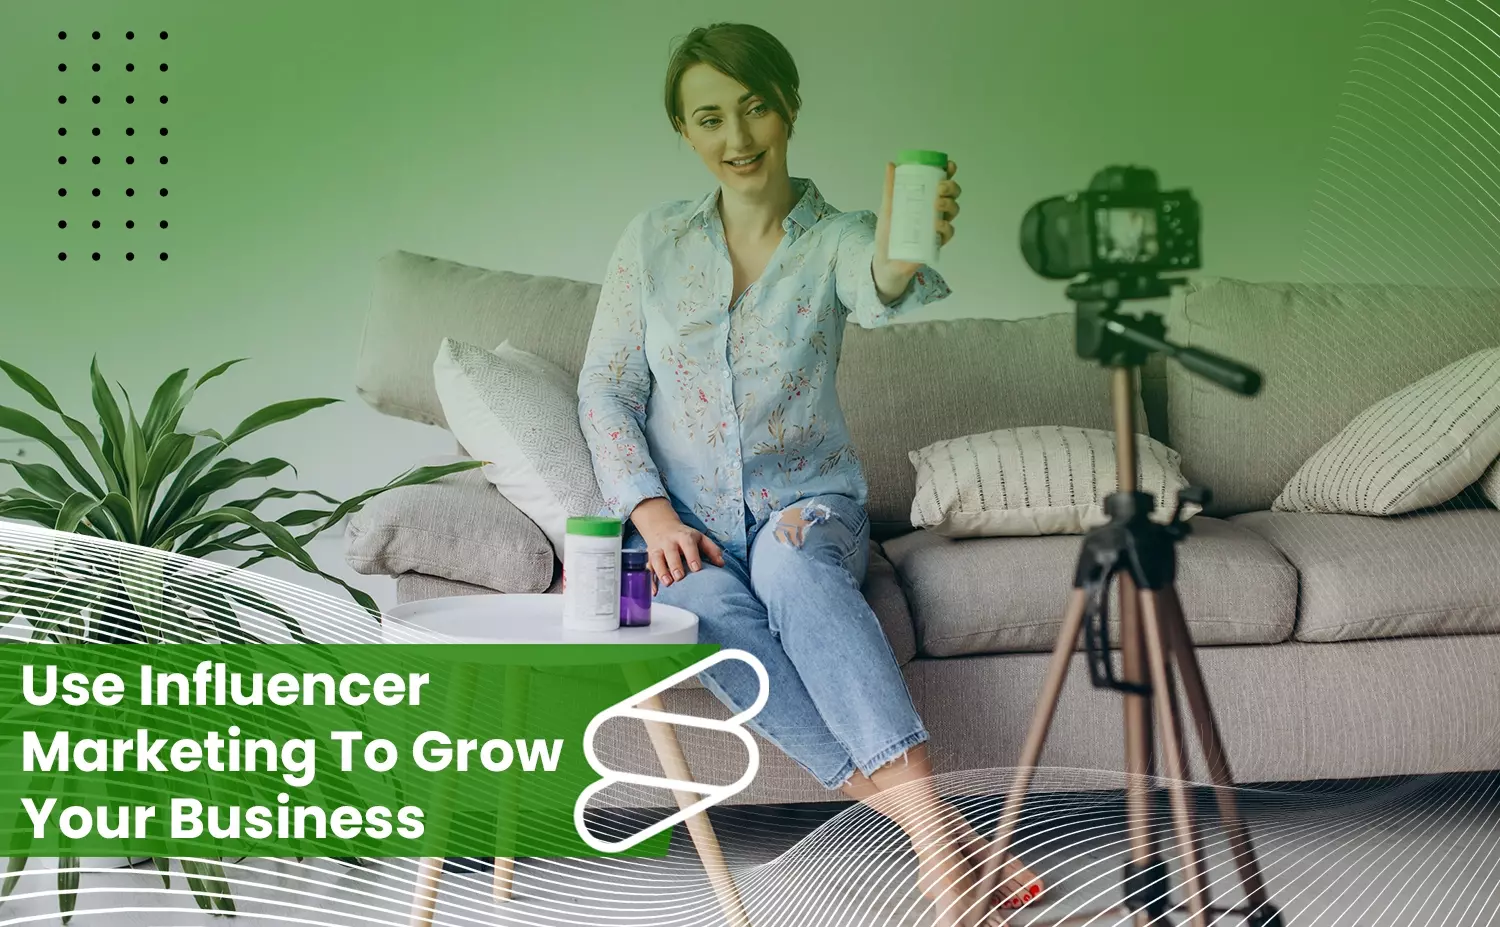 How To Use Influencer Marketing To Grow Your Business?